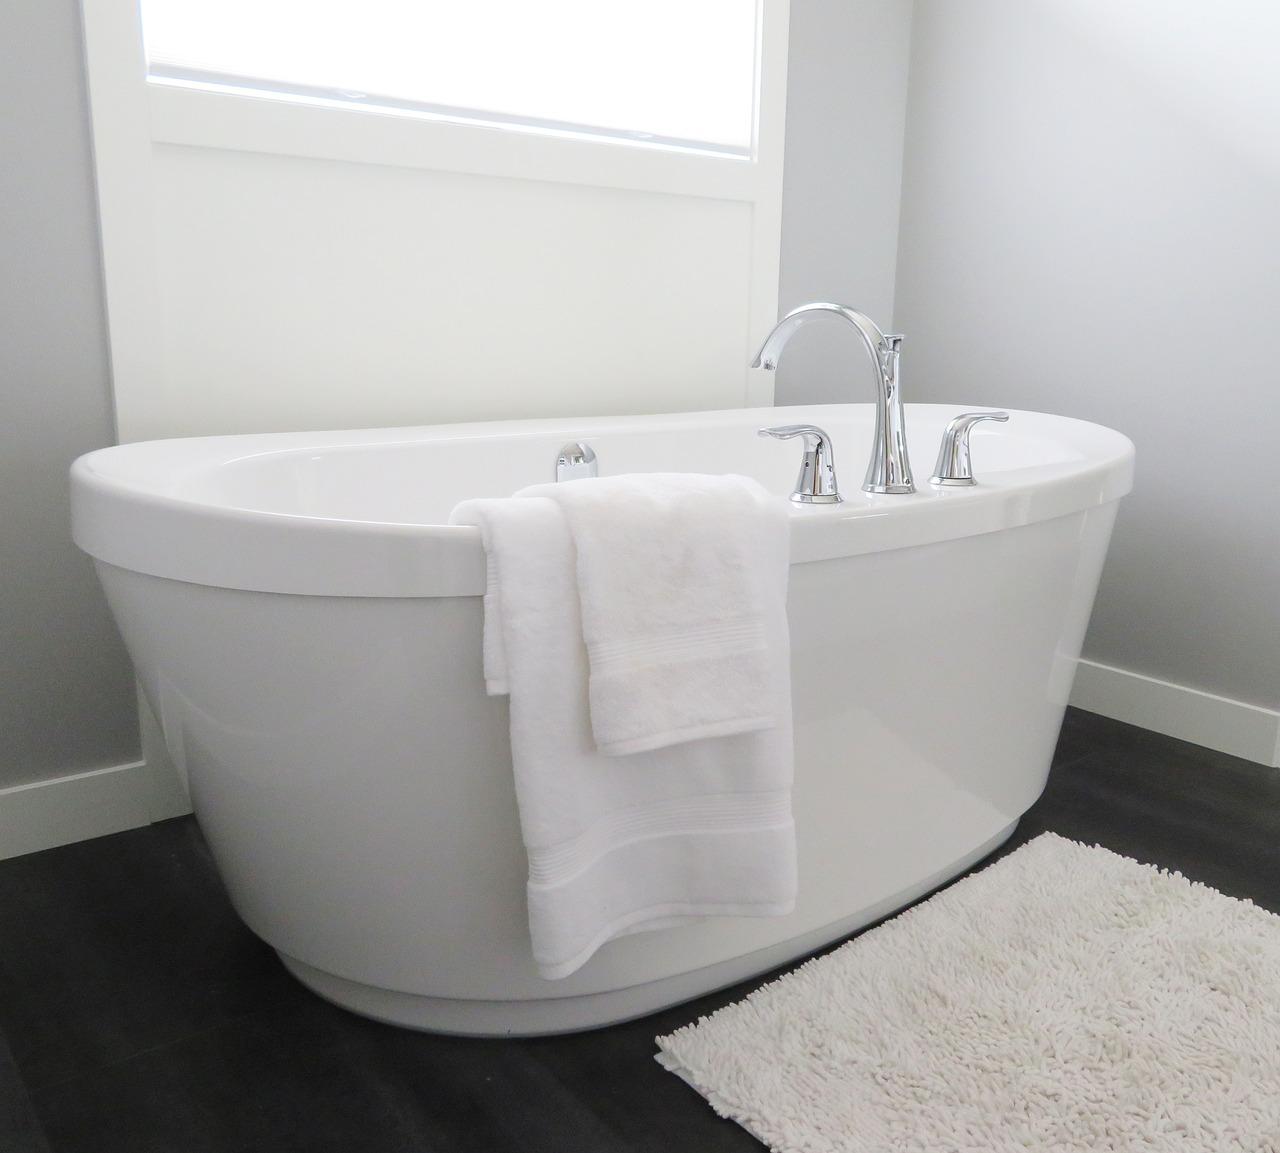  How Do I Know If My Tub Is Porcelain Or Enamel 